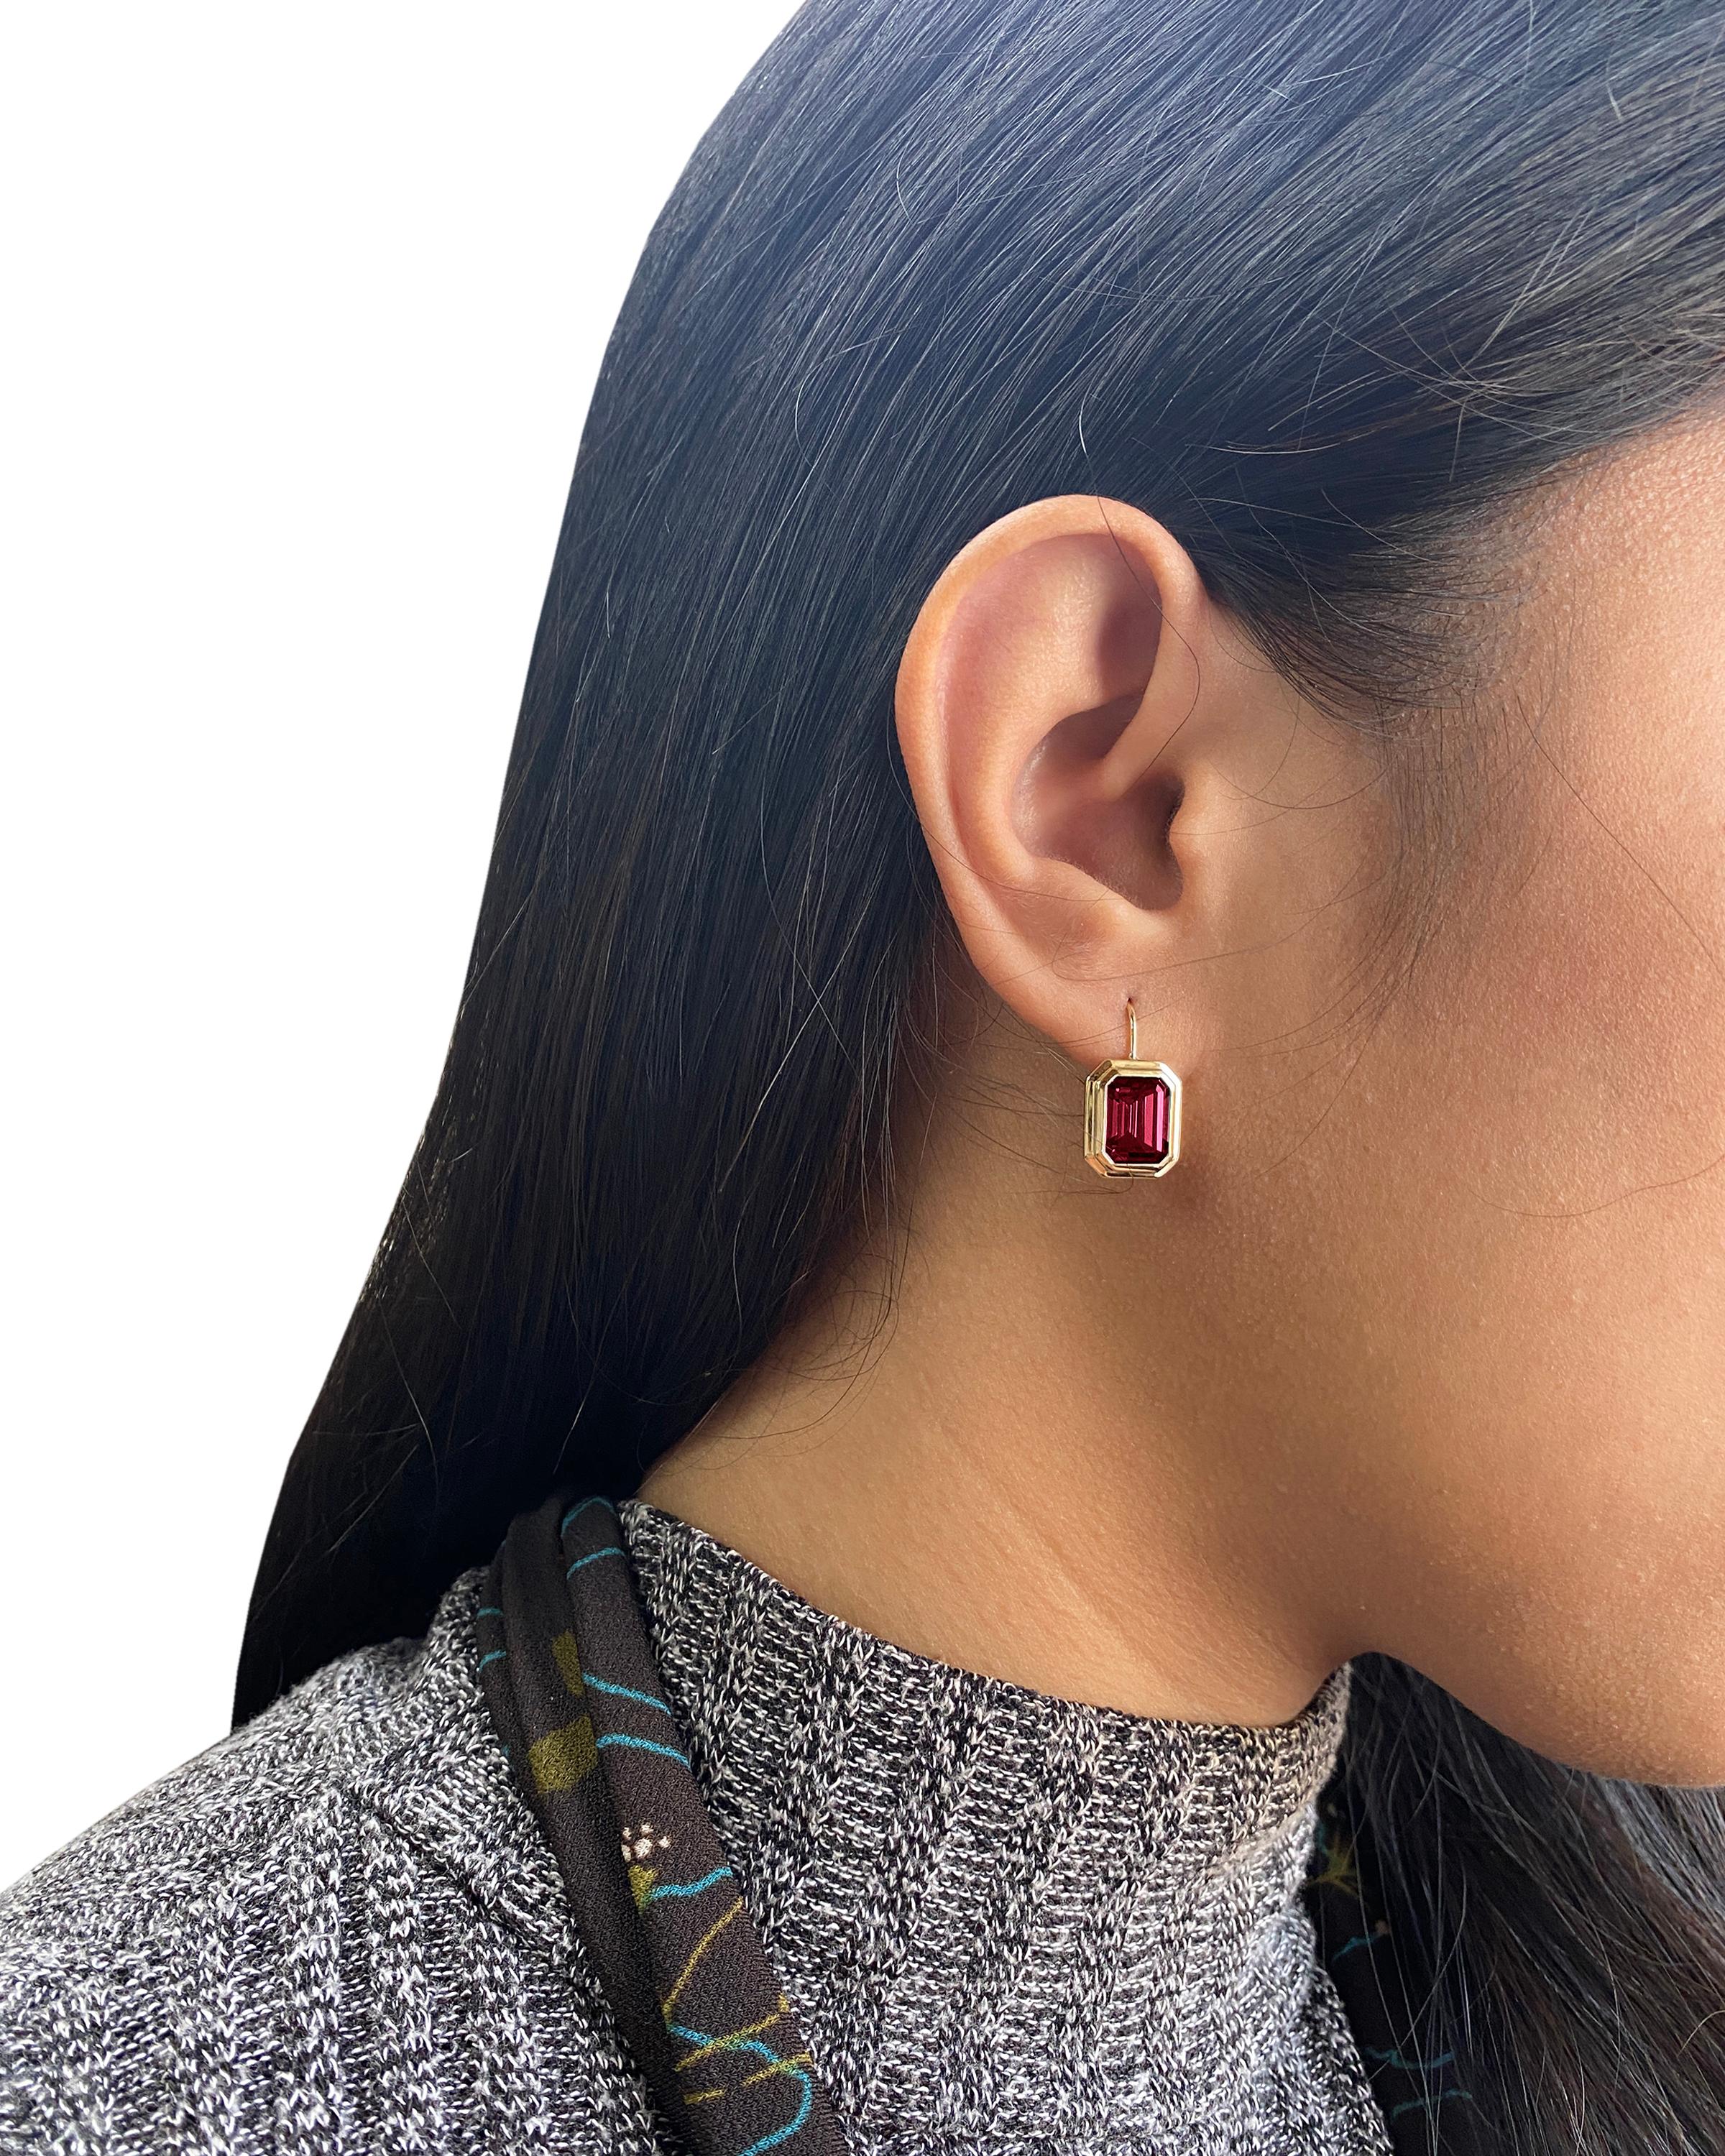 These Garnet Emerald Cut Bezel Set Earrings on Wire in 18K Yellow Gold from the 'Manhattan Collection are a stunning and sophisticated jewelry piece. These earrings feature exquisite garnet gemstones with an elegant emerald cut, cradled in a secure